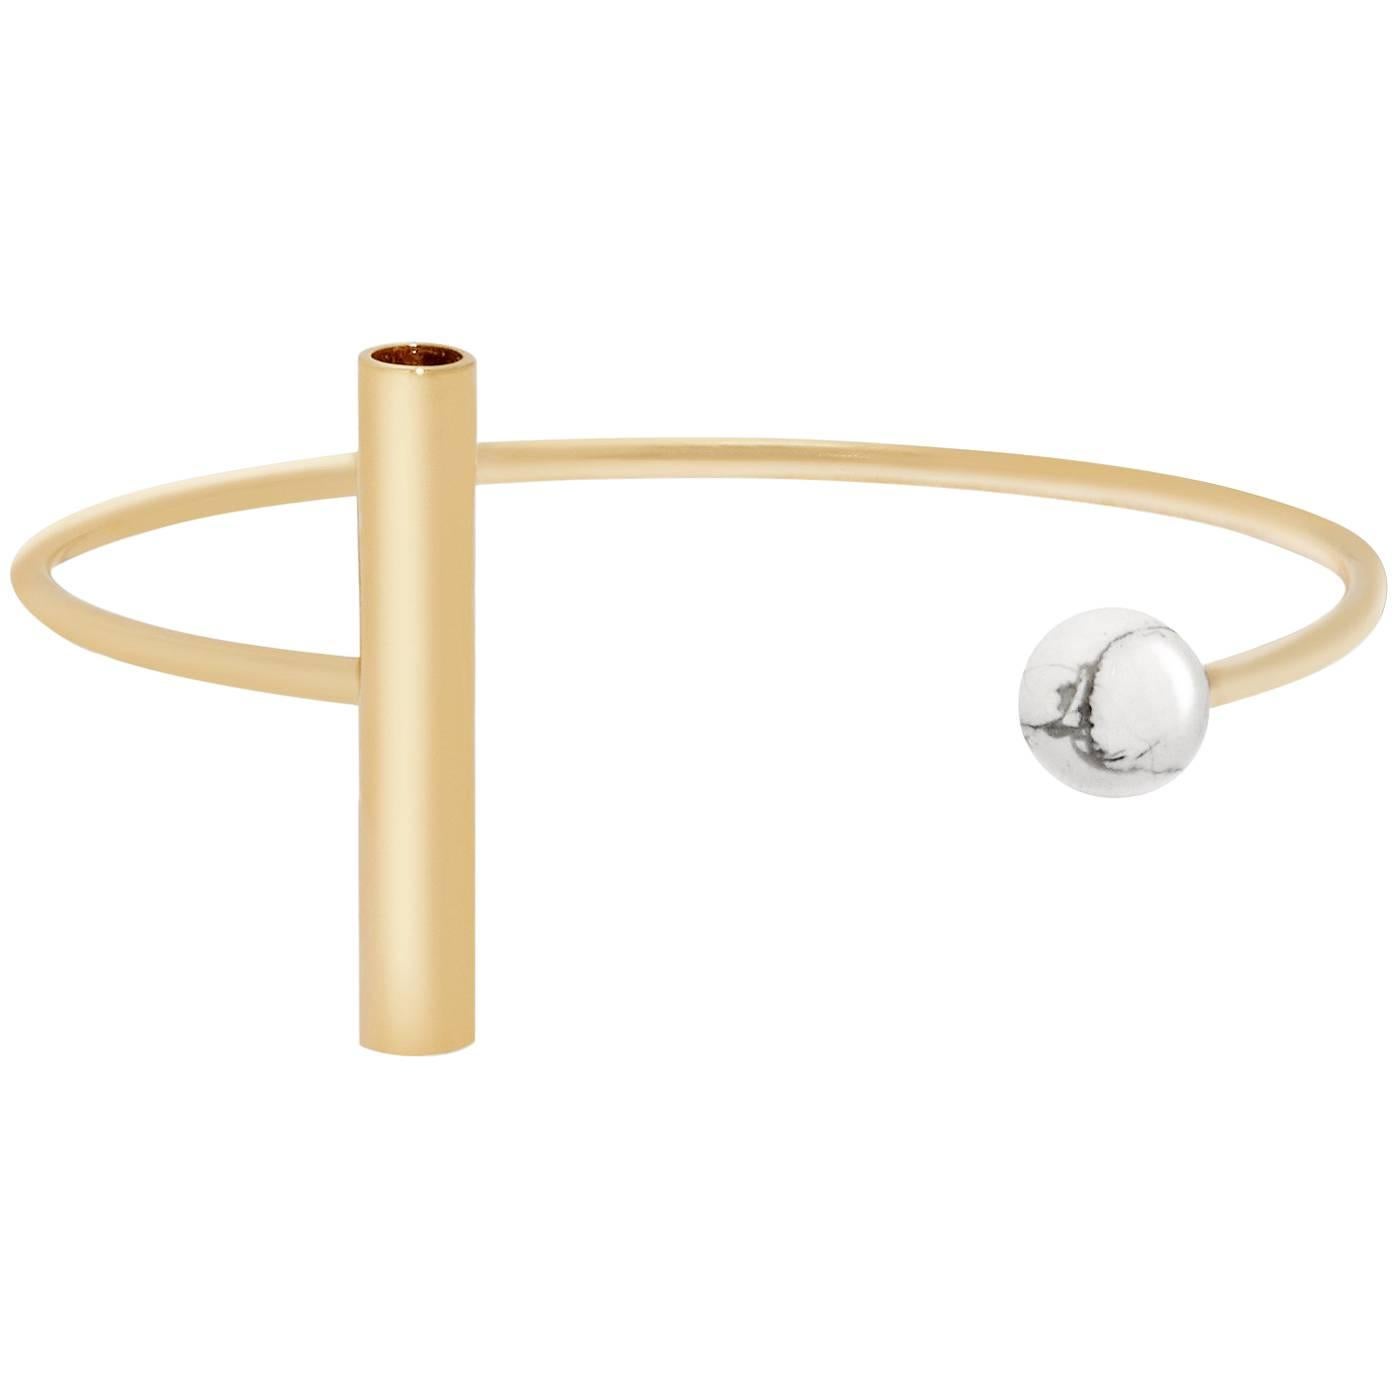 Geometric Cuff Bracelet in Gold Plate with Howlite by Allison Bryan